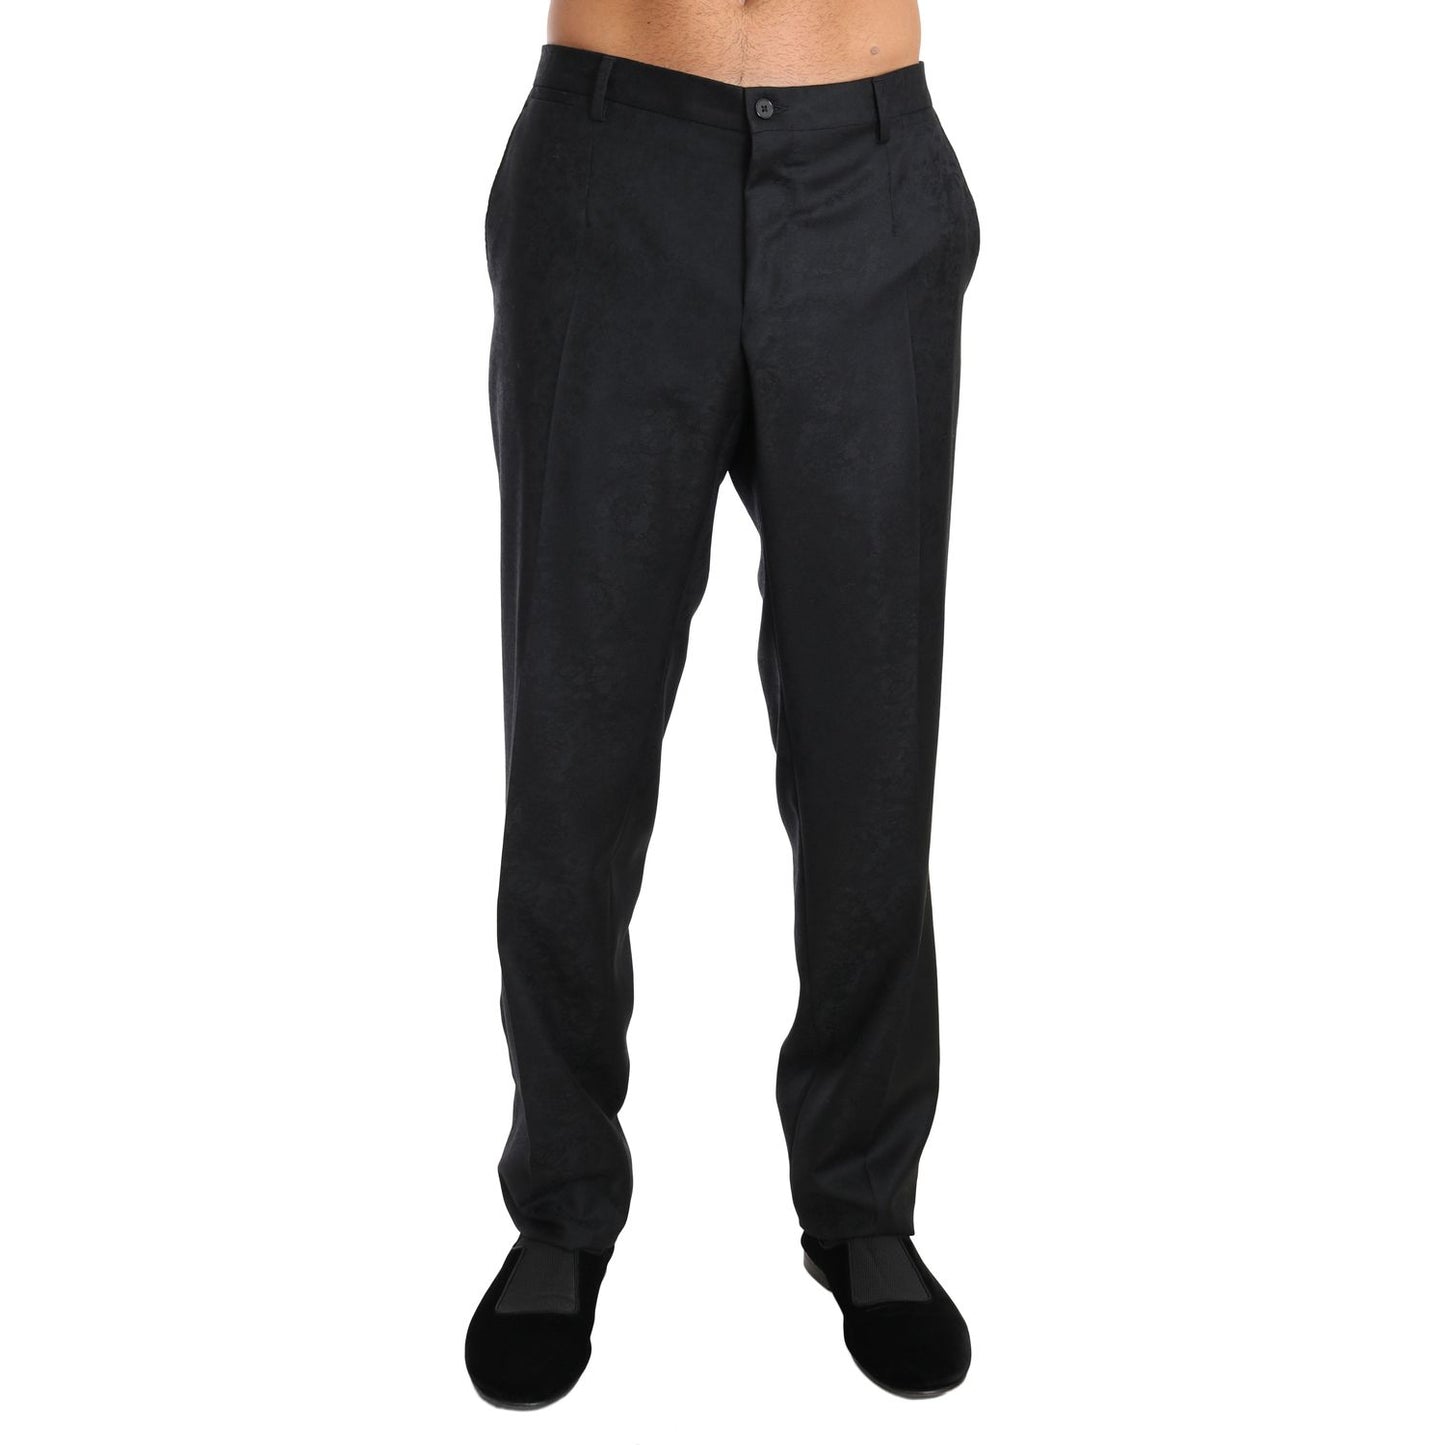 Dolce & Gabbana Elegant Gray Patterned Formal Pants gray-cotton-patterned-formal-trousers